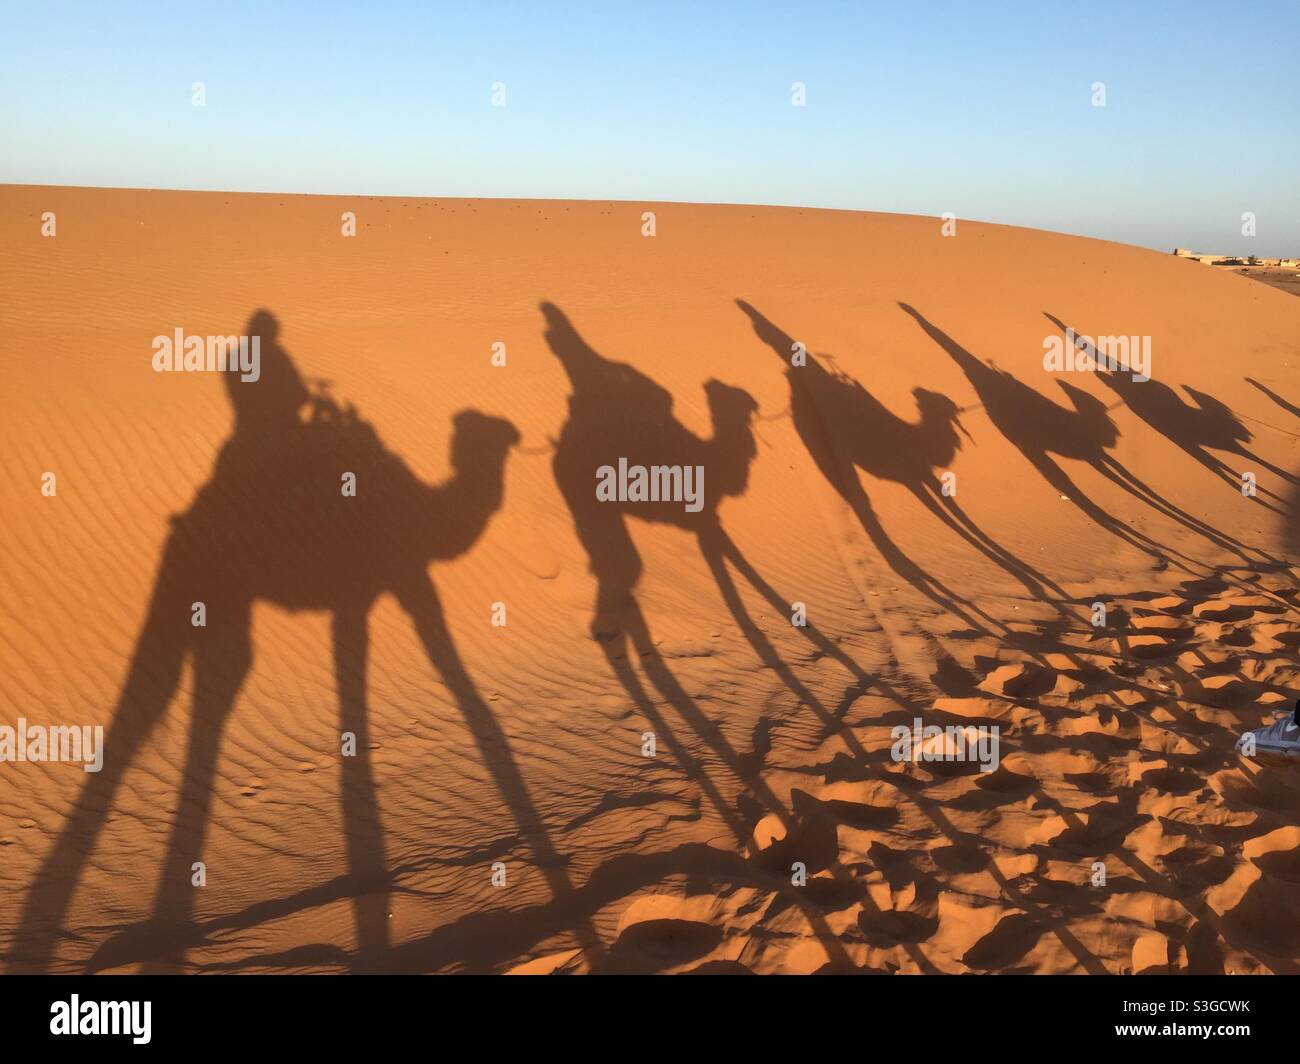 Shadows of camels against red sand of the Sahara desert, Morocco Stock Photo